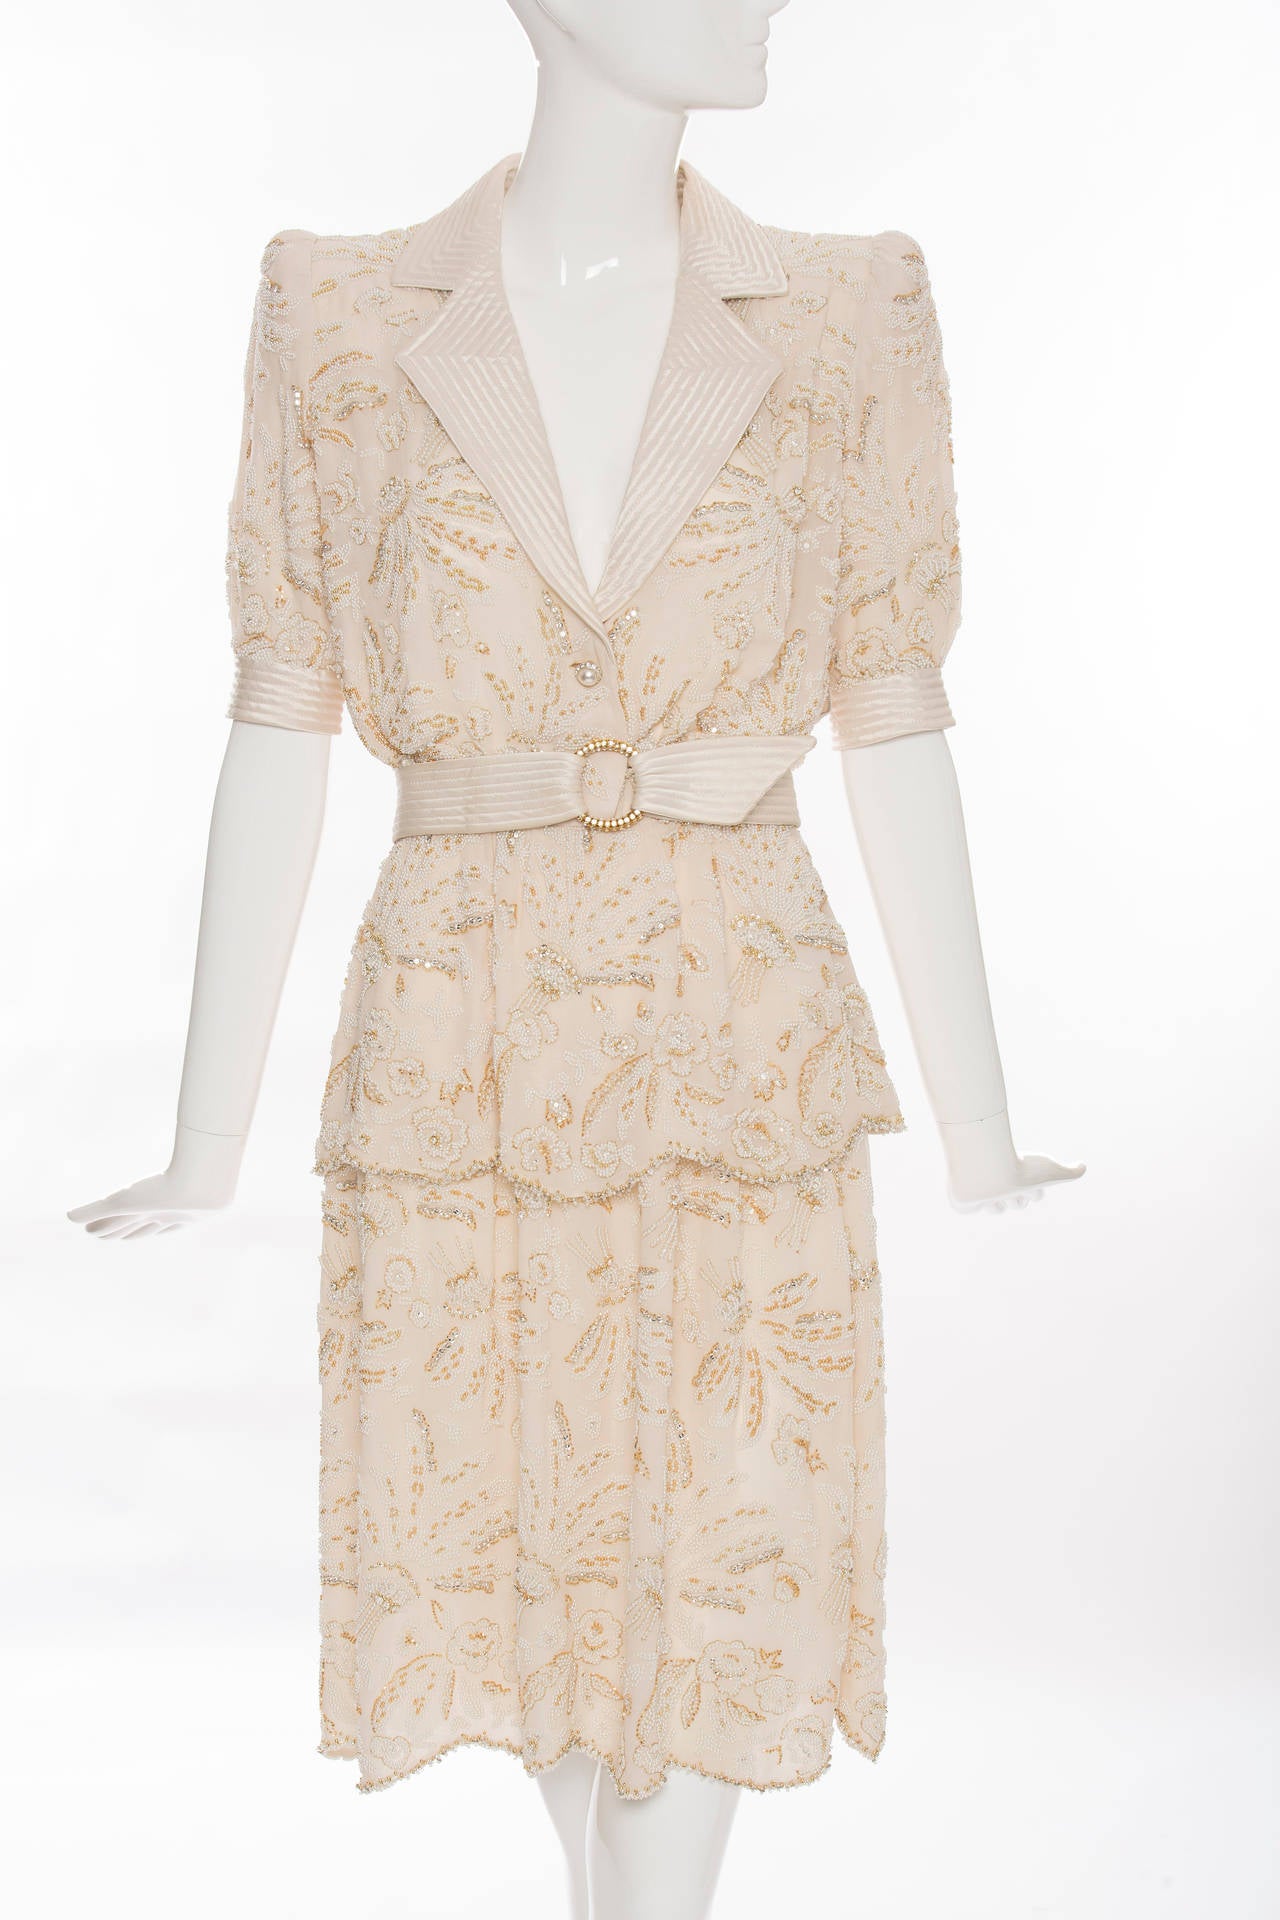 Valentino Haute Couture, Circa 1980's, cream silk chiffon skirt suit with seed pearl embroidery, quilted silk satin trim and self belt, side zip, and fully lined.

Jacket: Bust, 36, Waist 24 Length 26.5

Skirt:  Waist 23, Hips 48;  Length 24